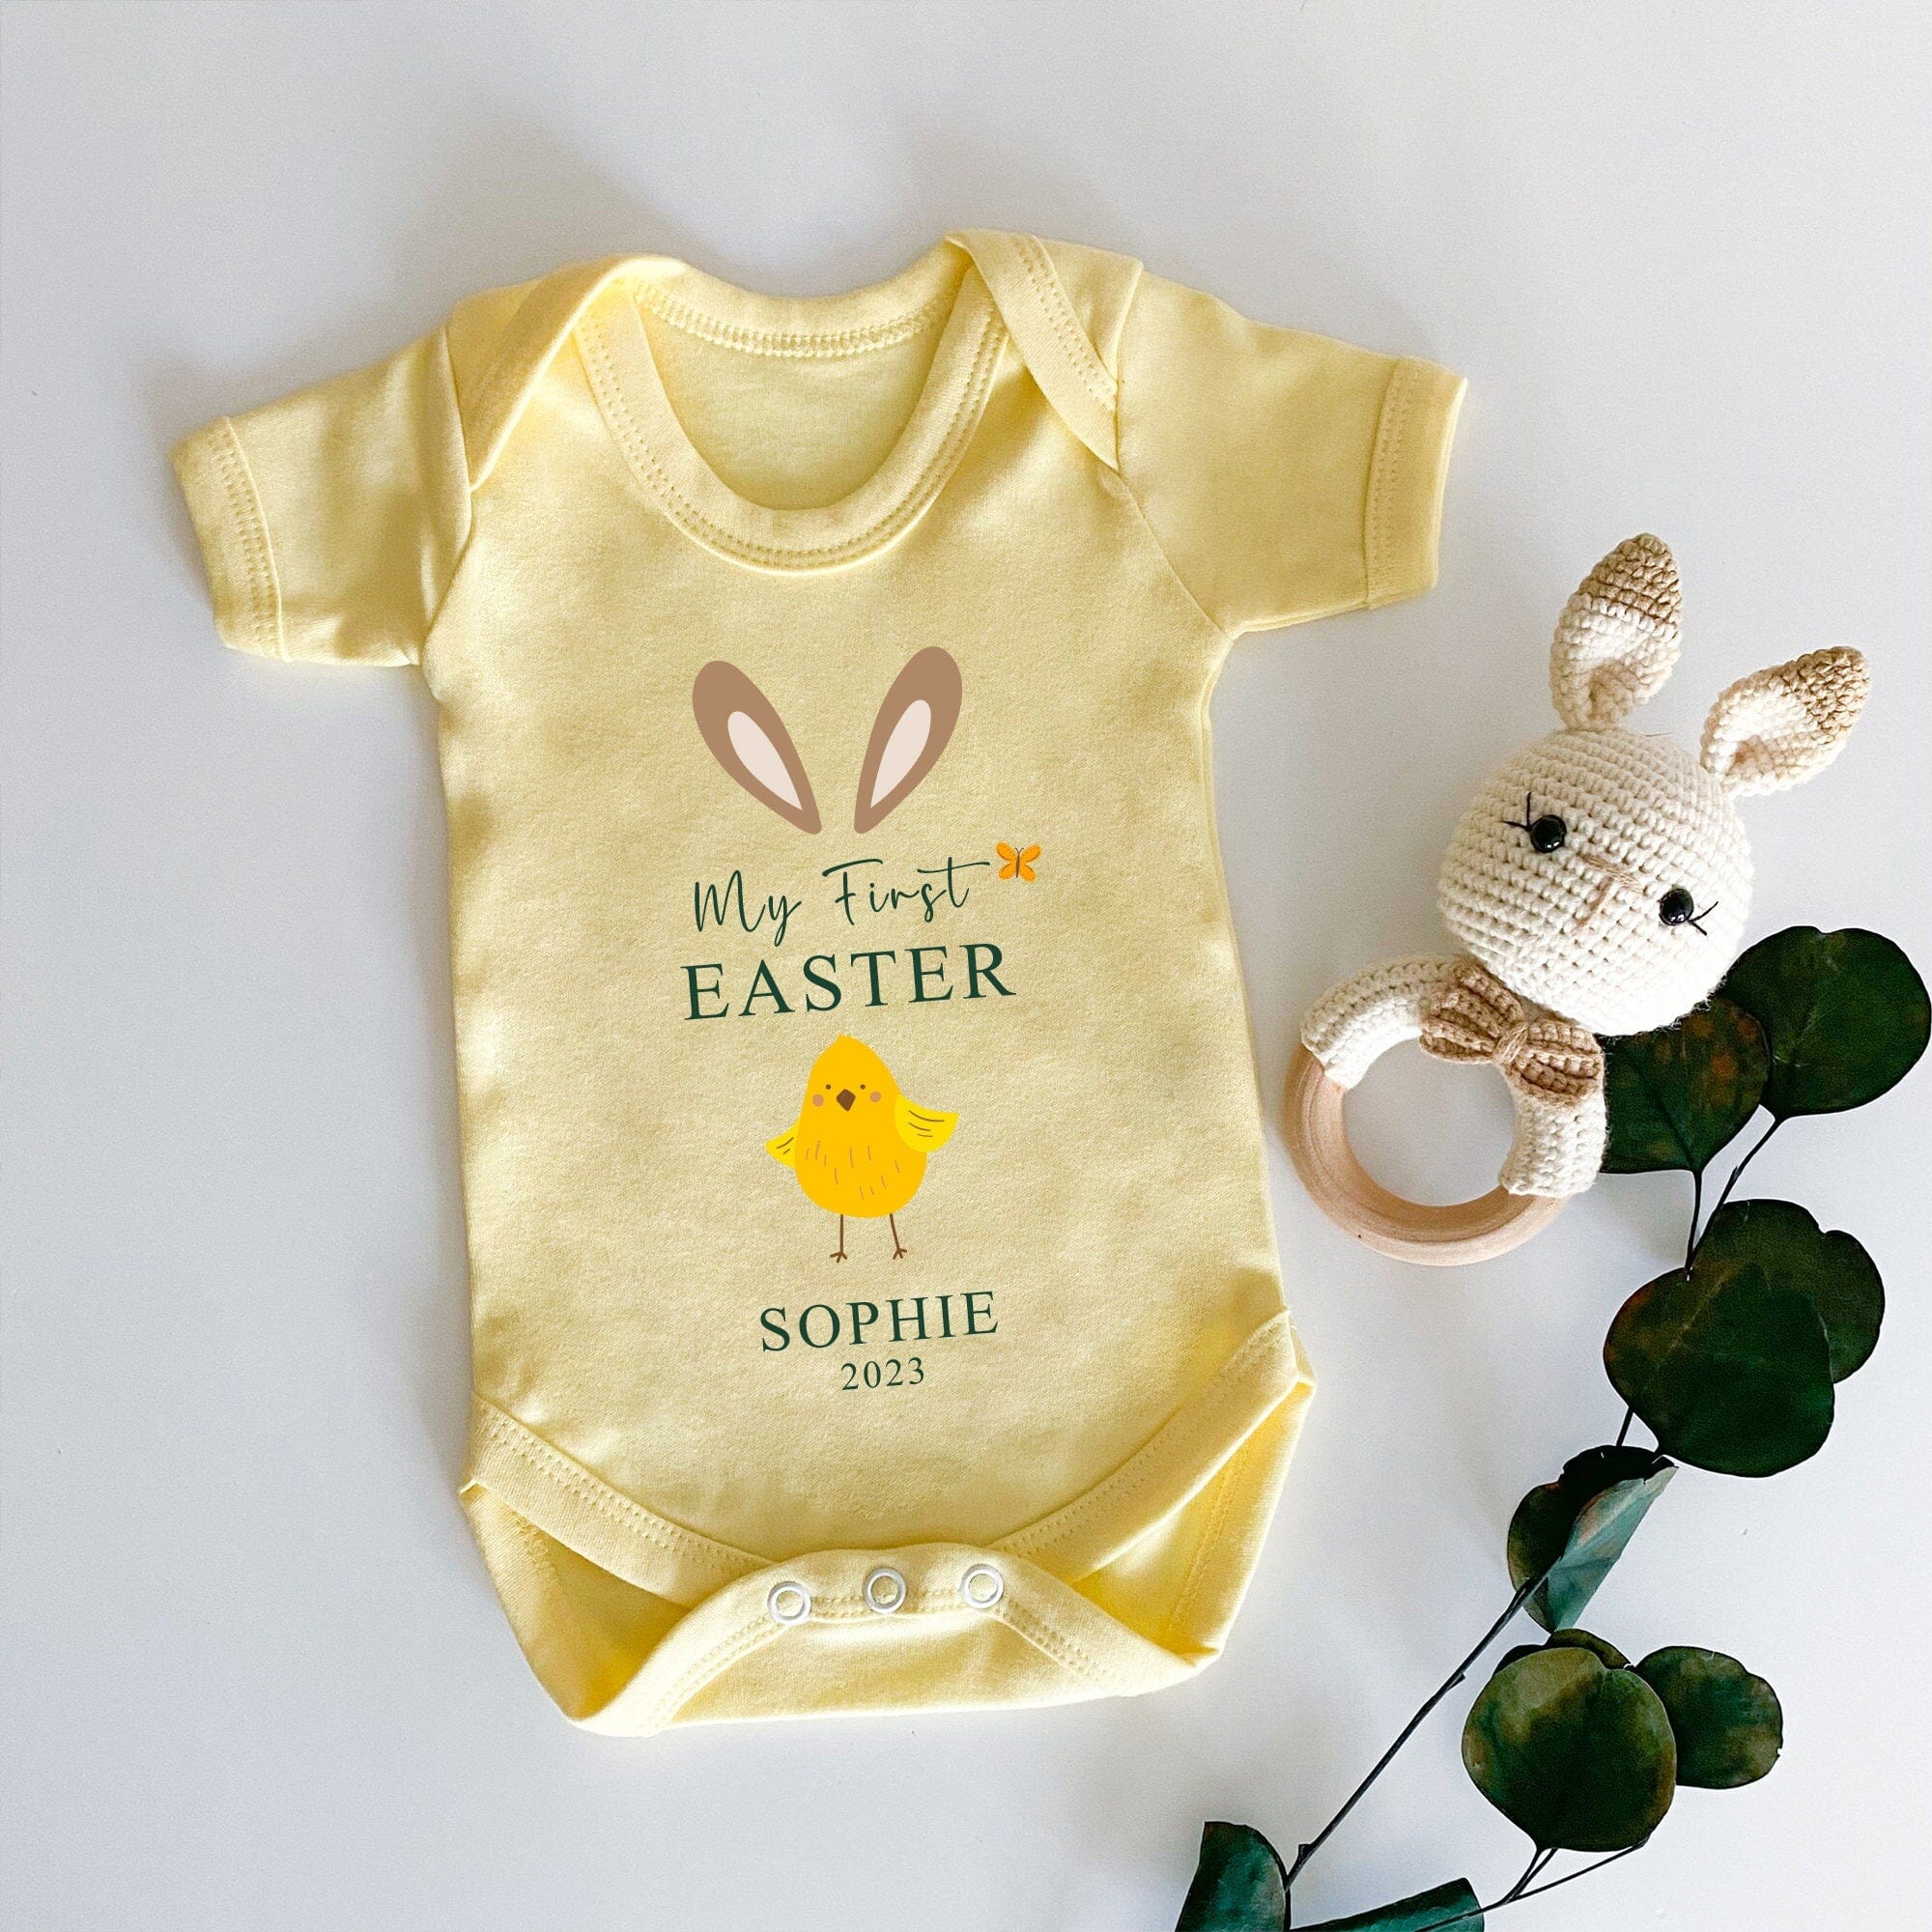 Personalised My First Easter bunny bodysuit with name and year, Easter gift for boy girl